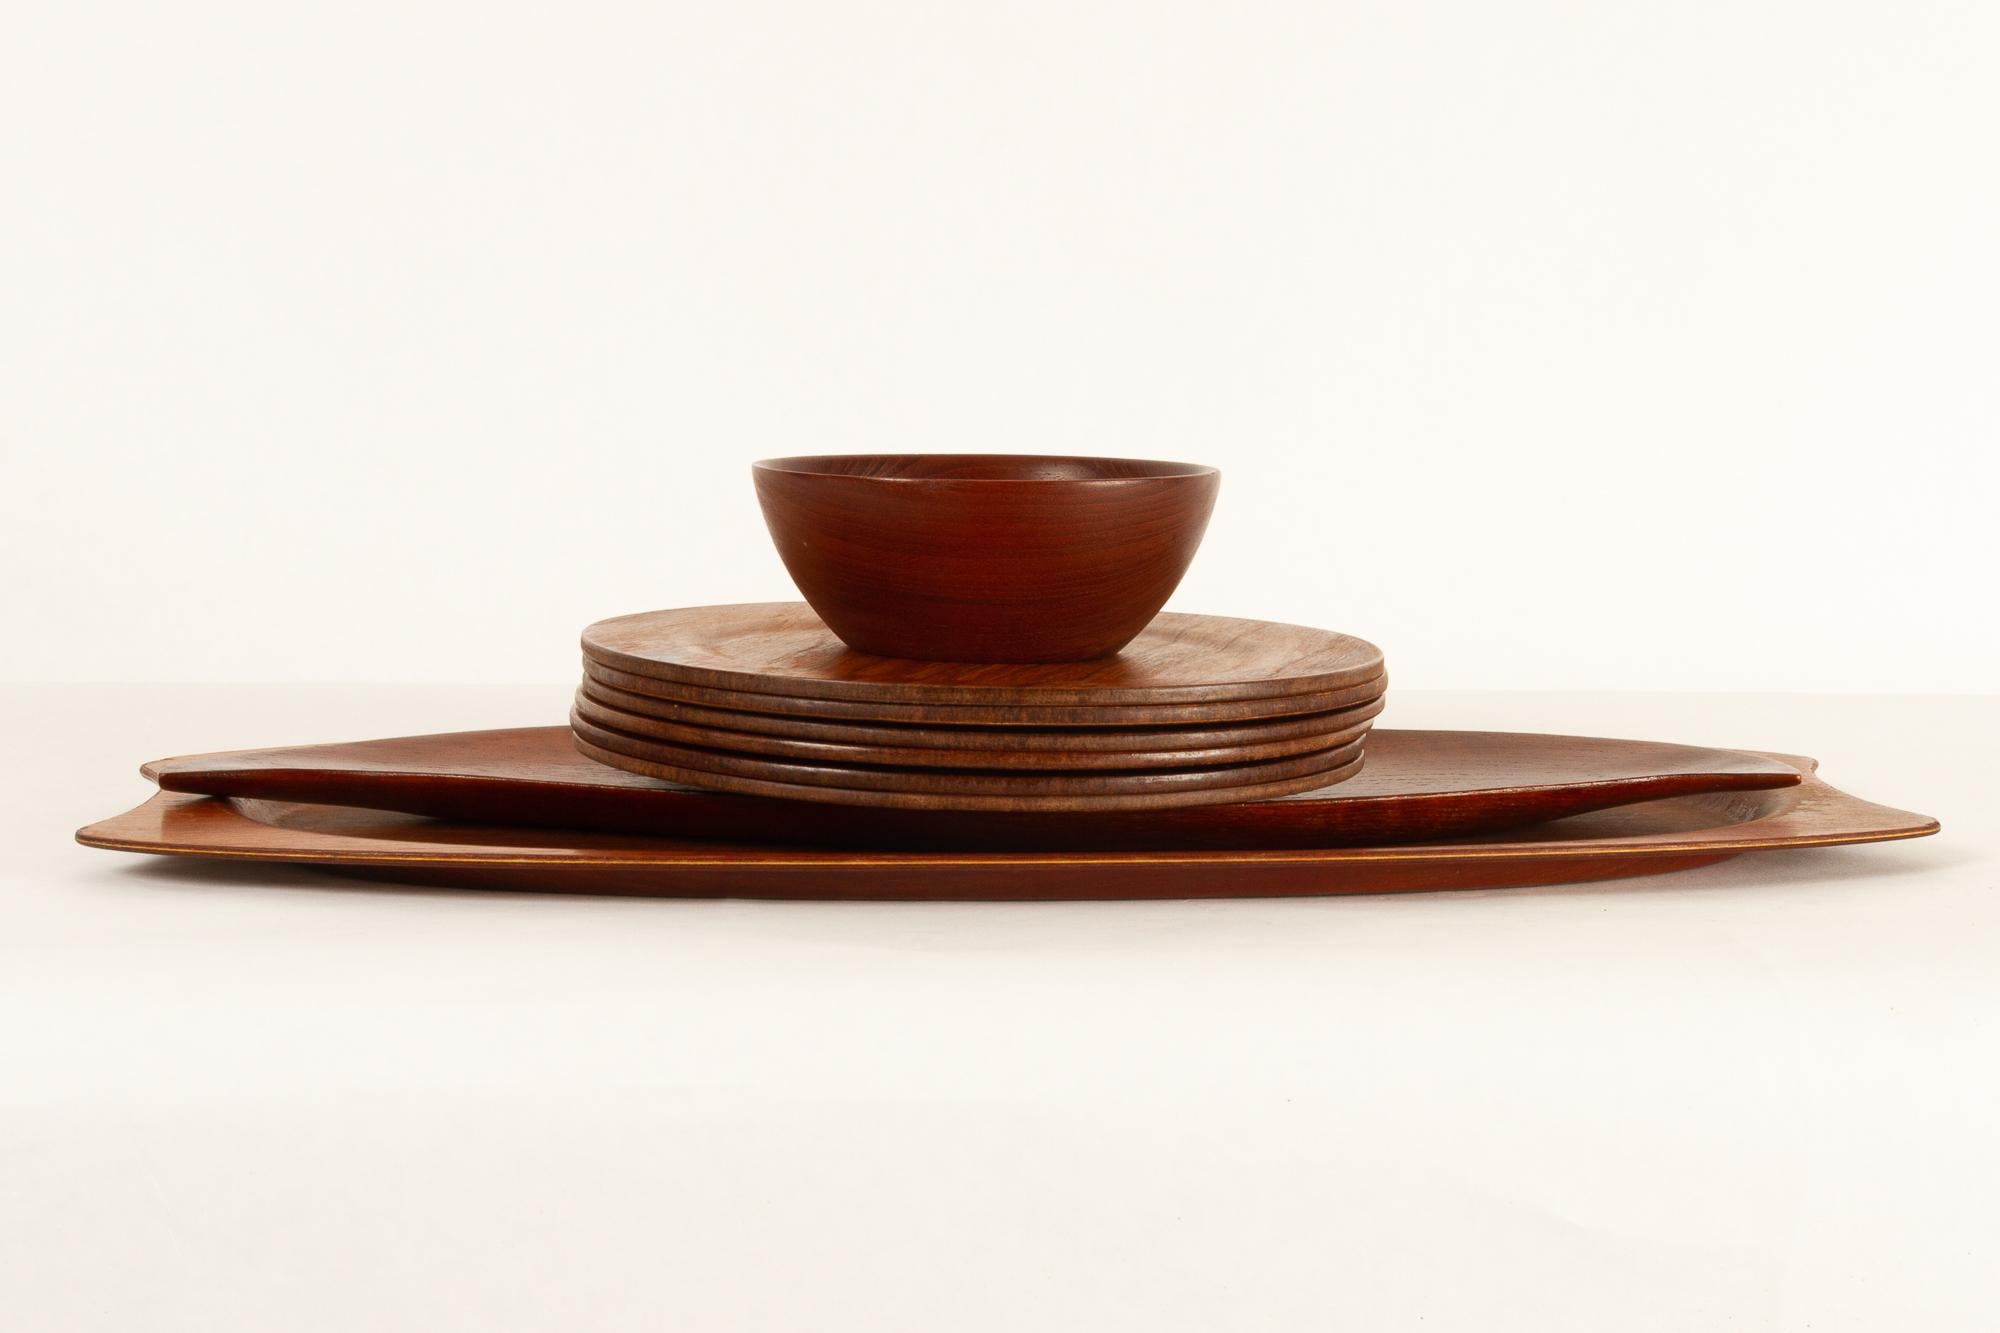 Danish vintage teak tray, plates and bowl 1960s set of 9.
Mid-Century Modern Danish tableware.
This set consists of:
A large oval serving tray by Silva, length 59.5 cm.
Six plates by Johs Andersen, diameter 26.5 cm.
A leaf shaped tray in solid